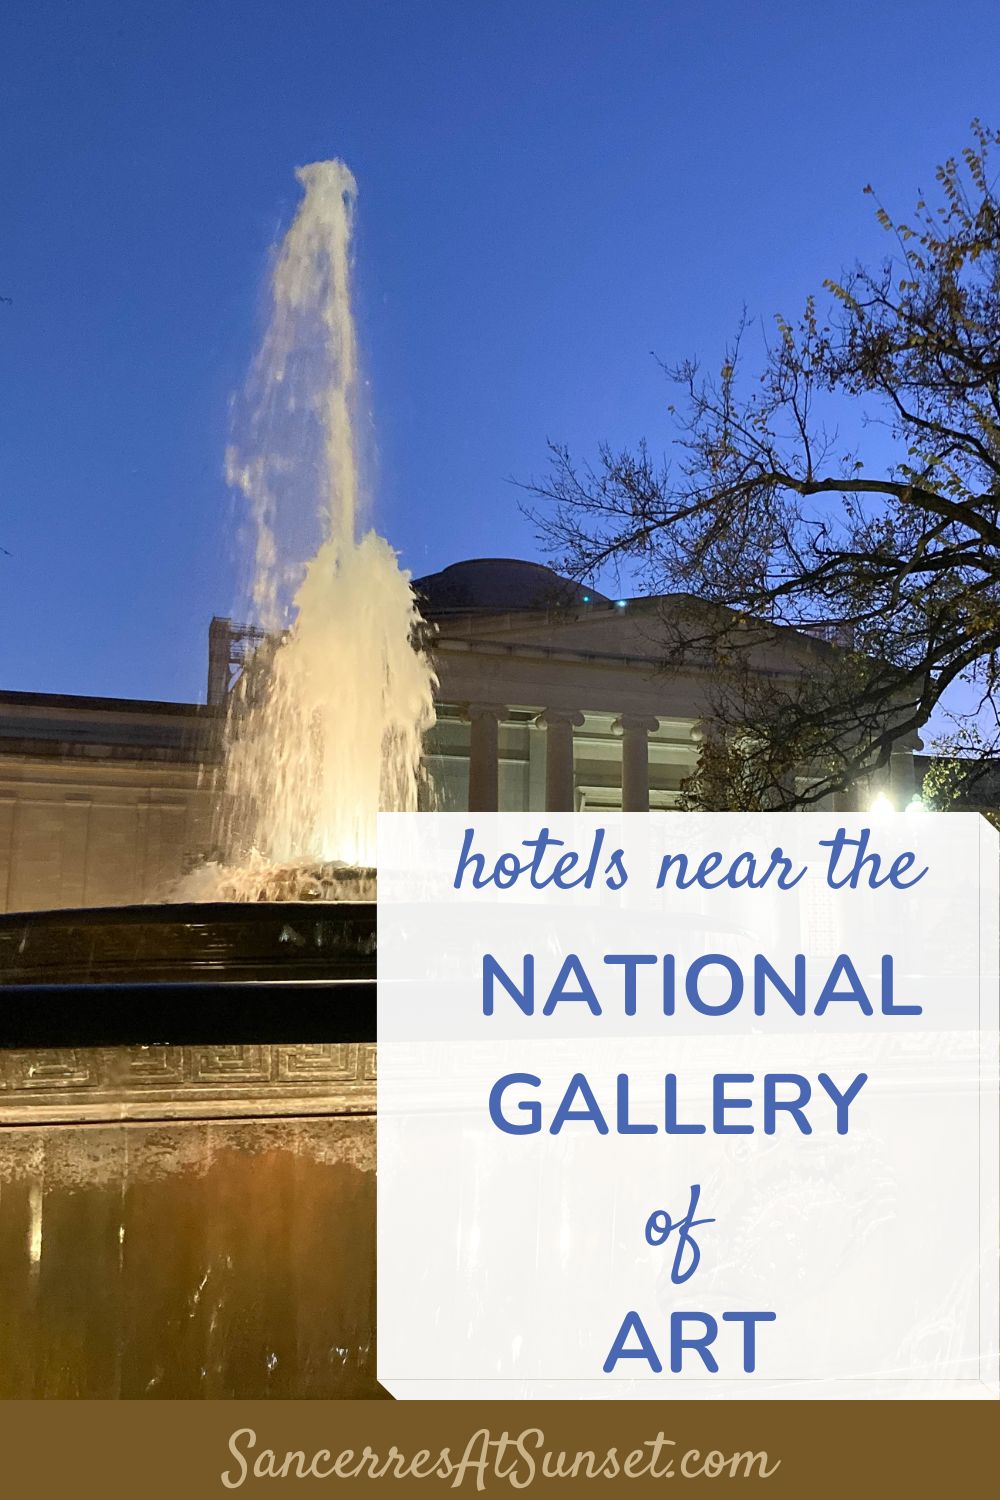 5 Hotels near the National Gallery of Art in Washington, D.C.